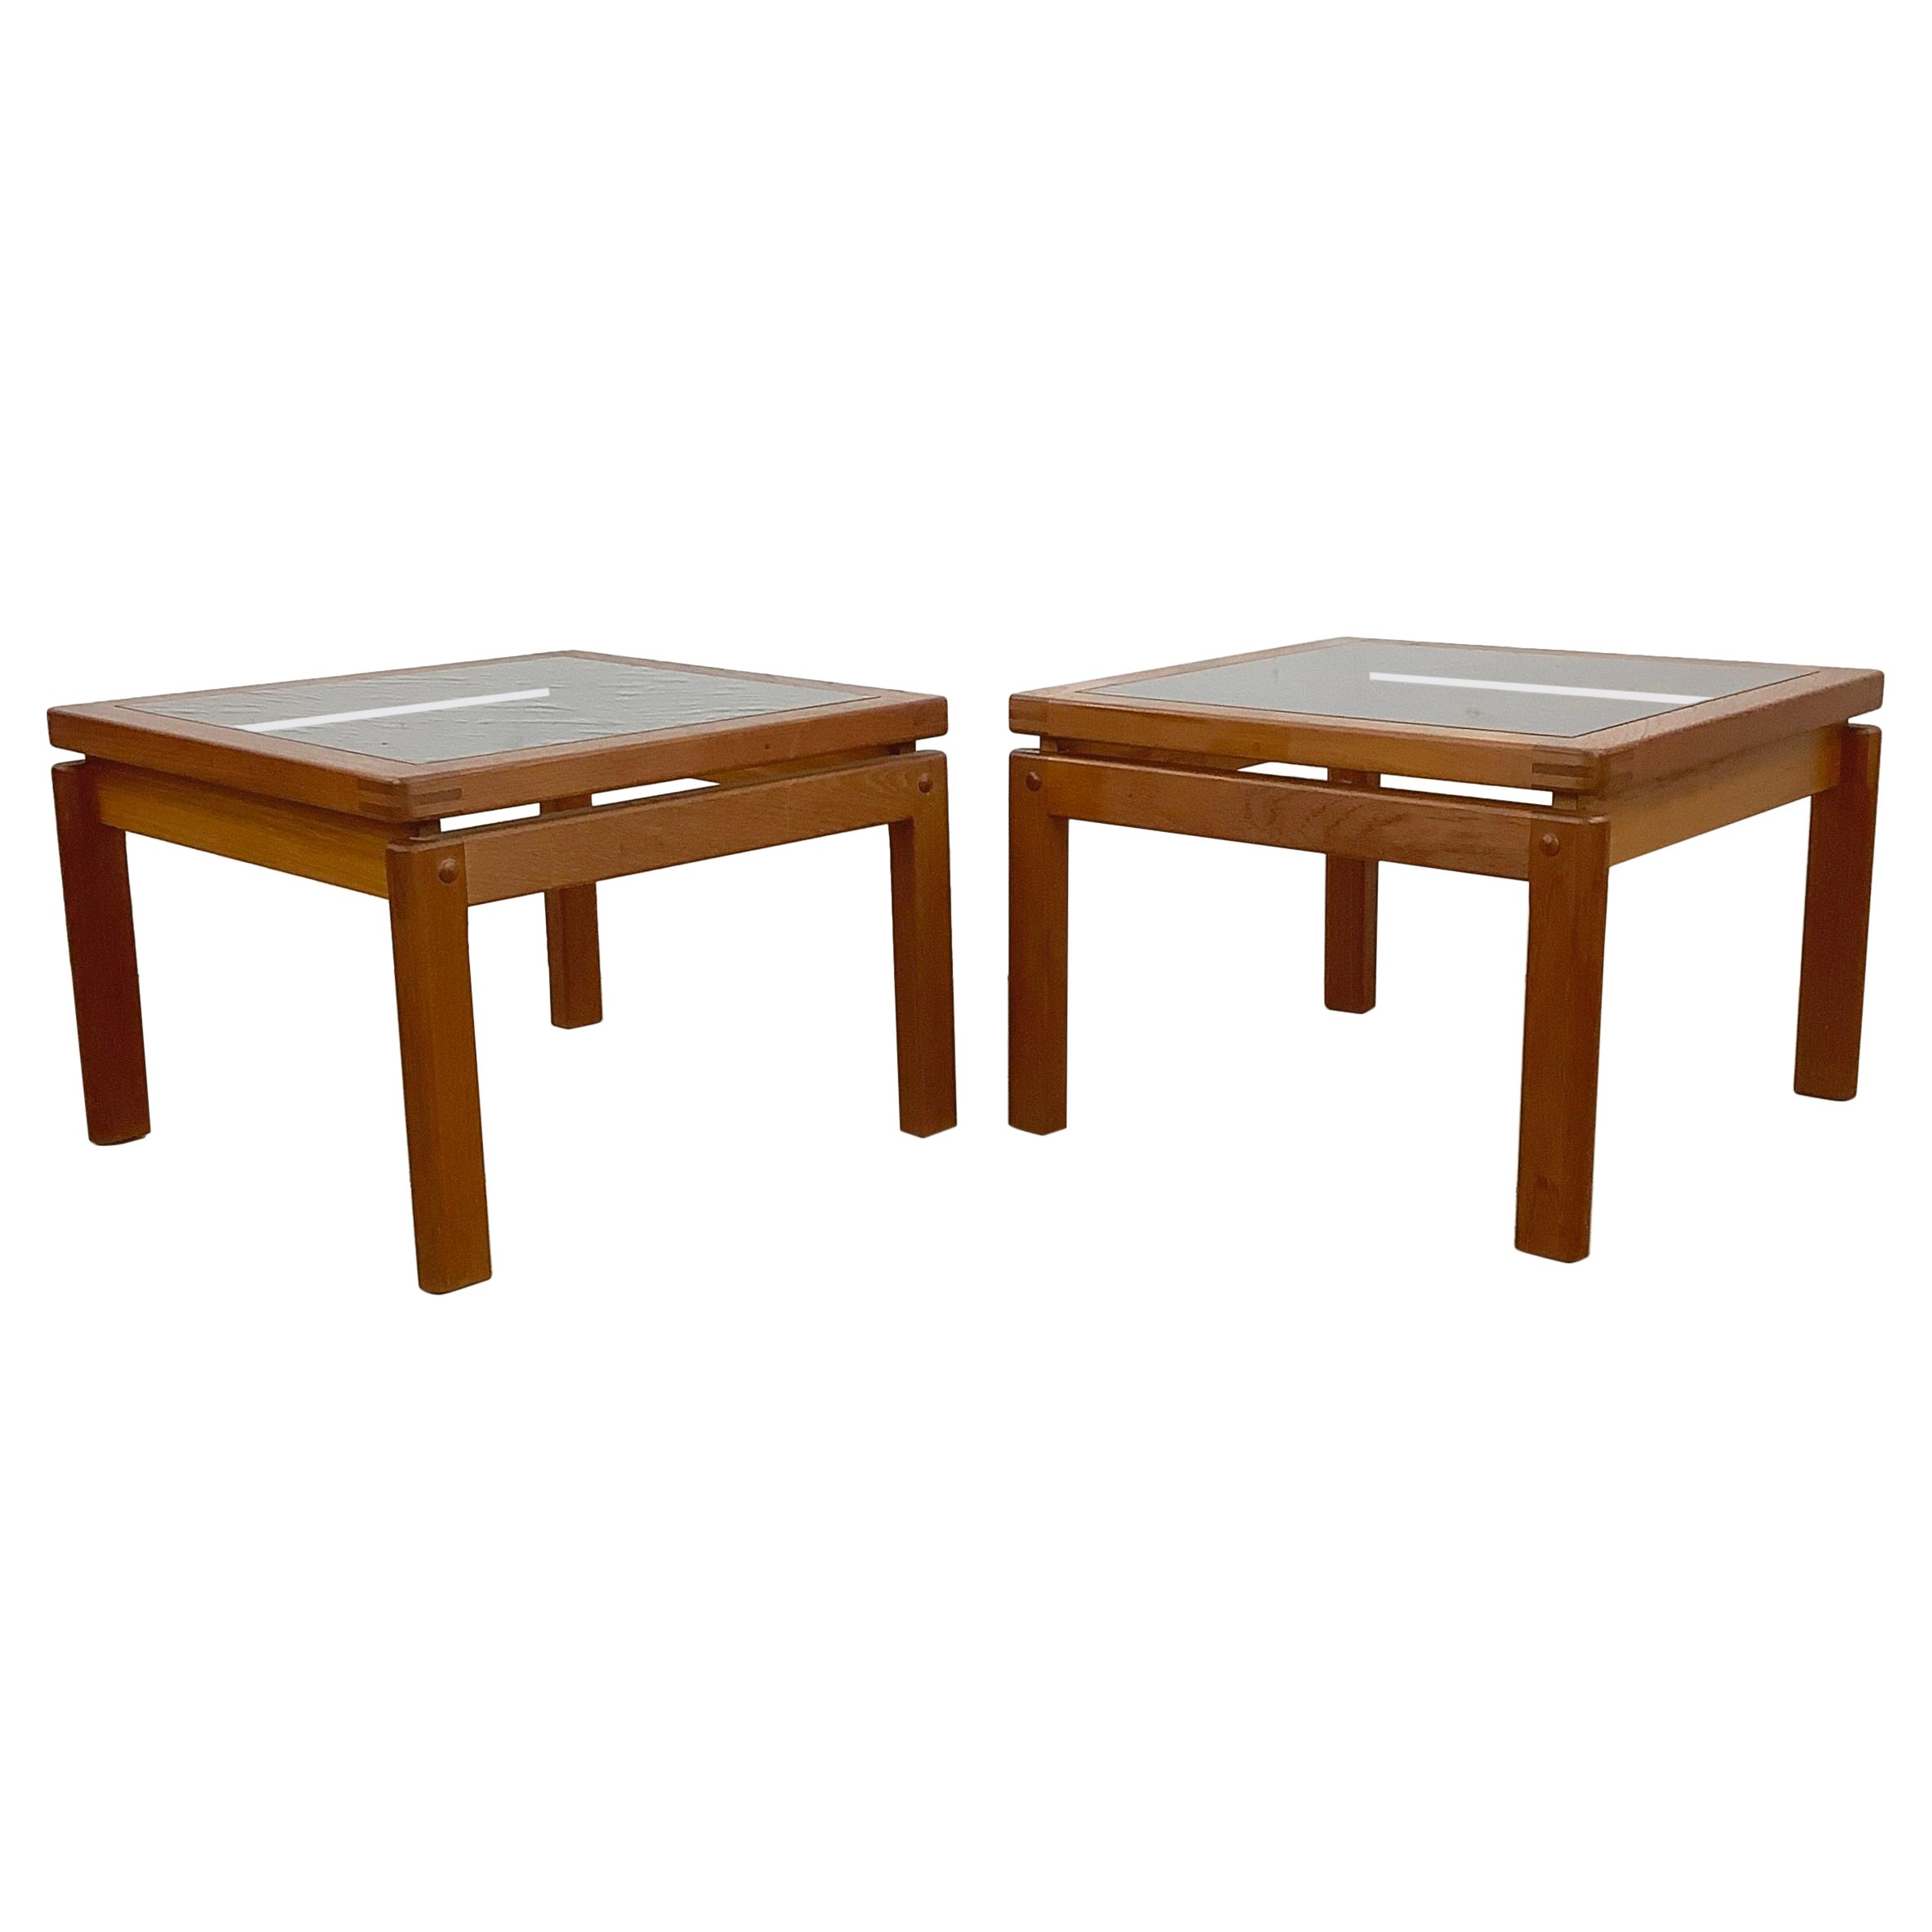 Pair Scandinavian Modern End Tables With Teak Joinery